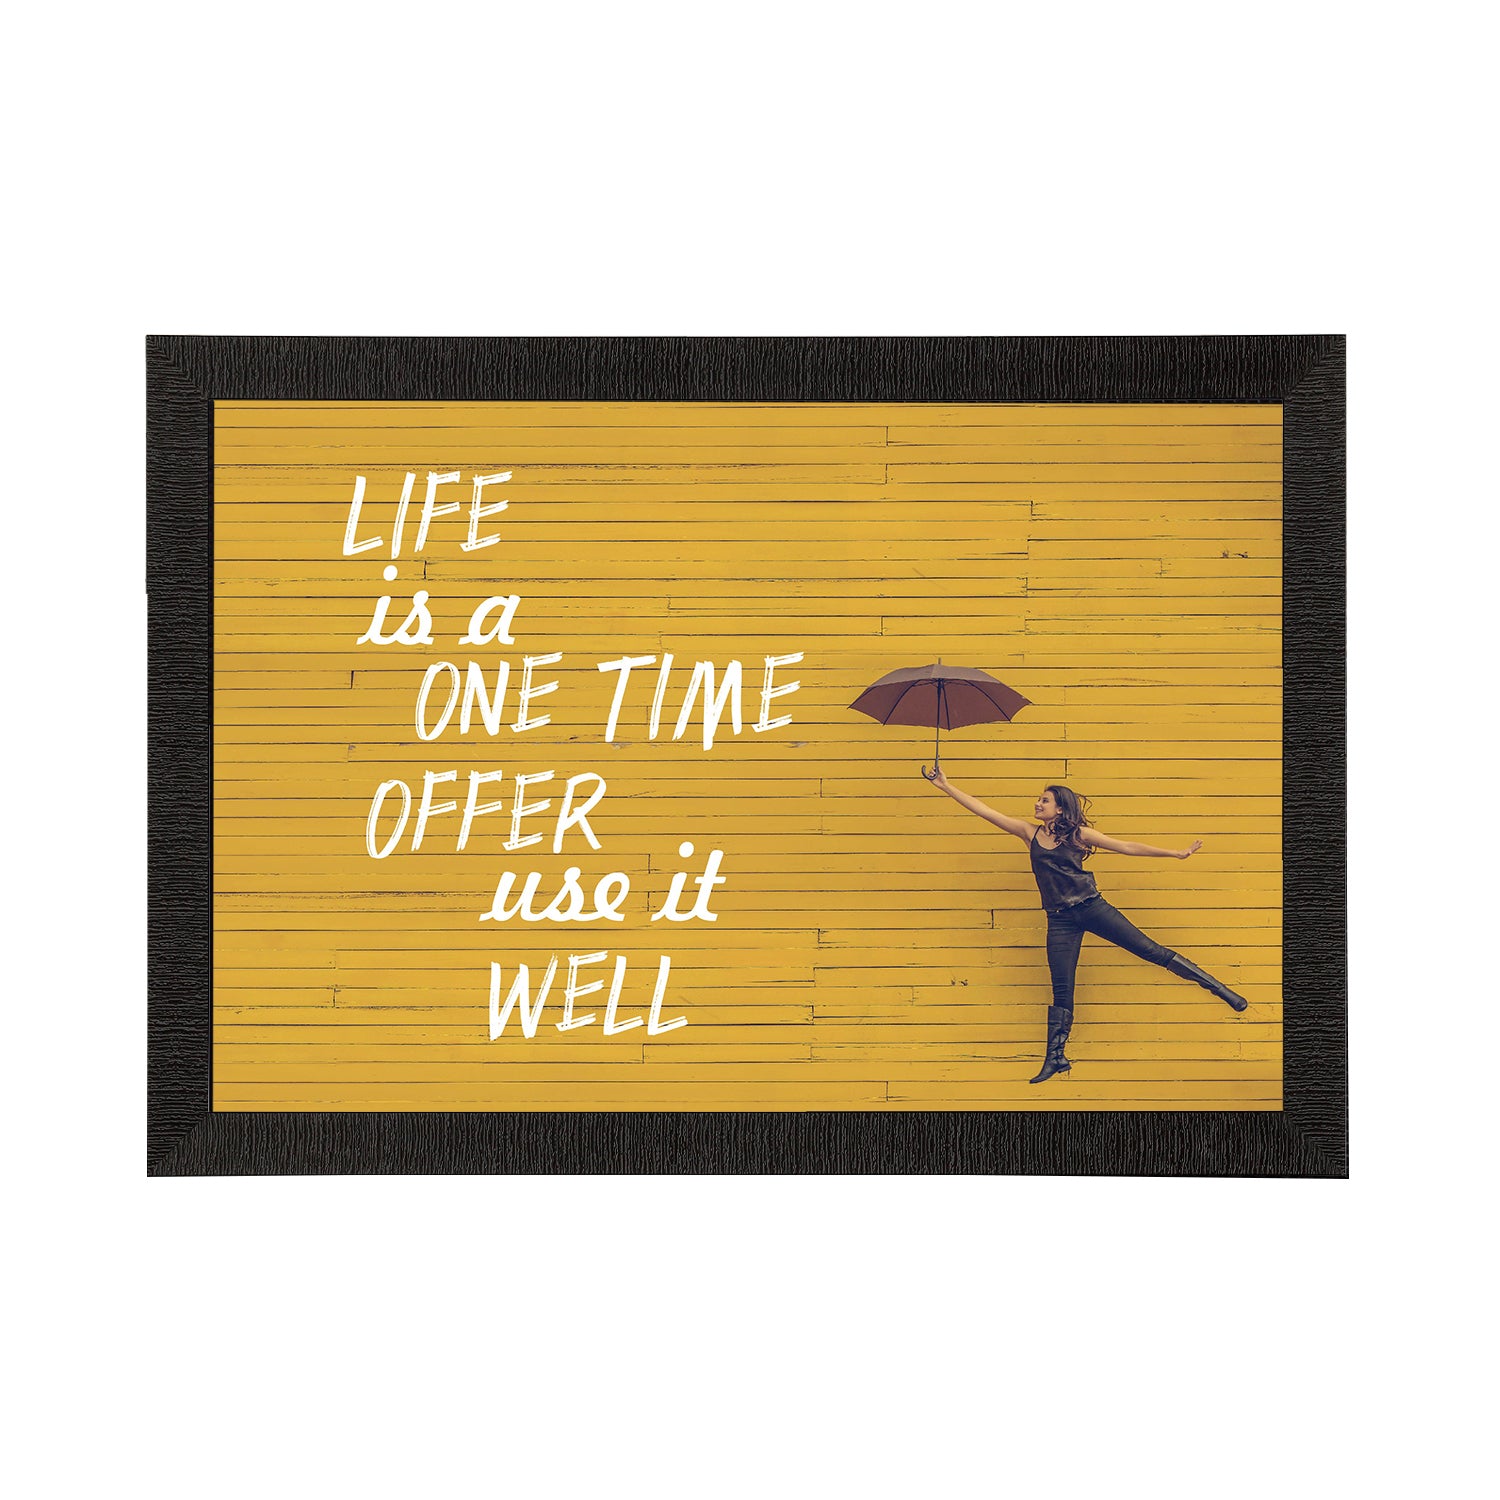 "Life Is A One Time Offer Use It Well" Motivational Quote Satin Matt Texture UV Art Painting